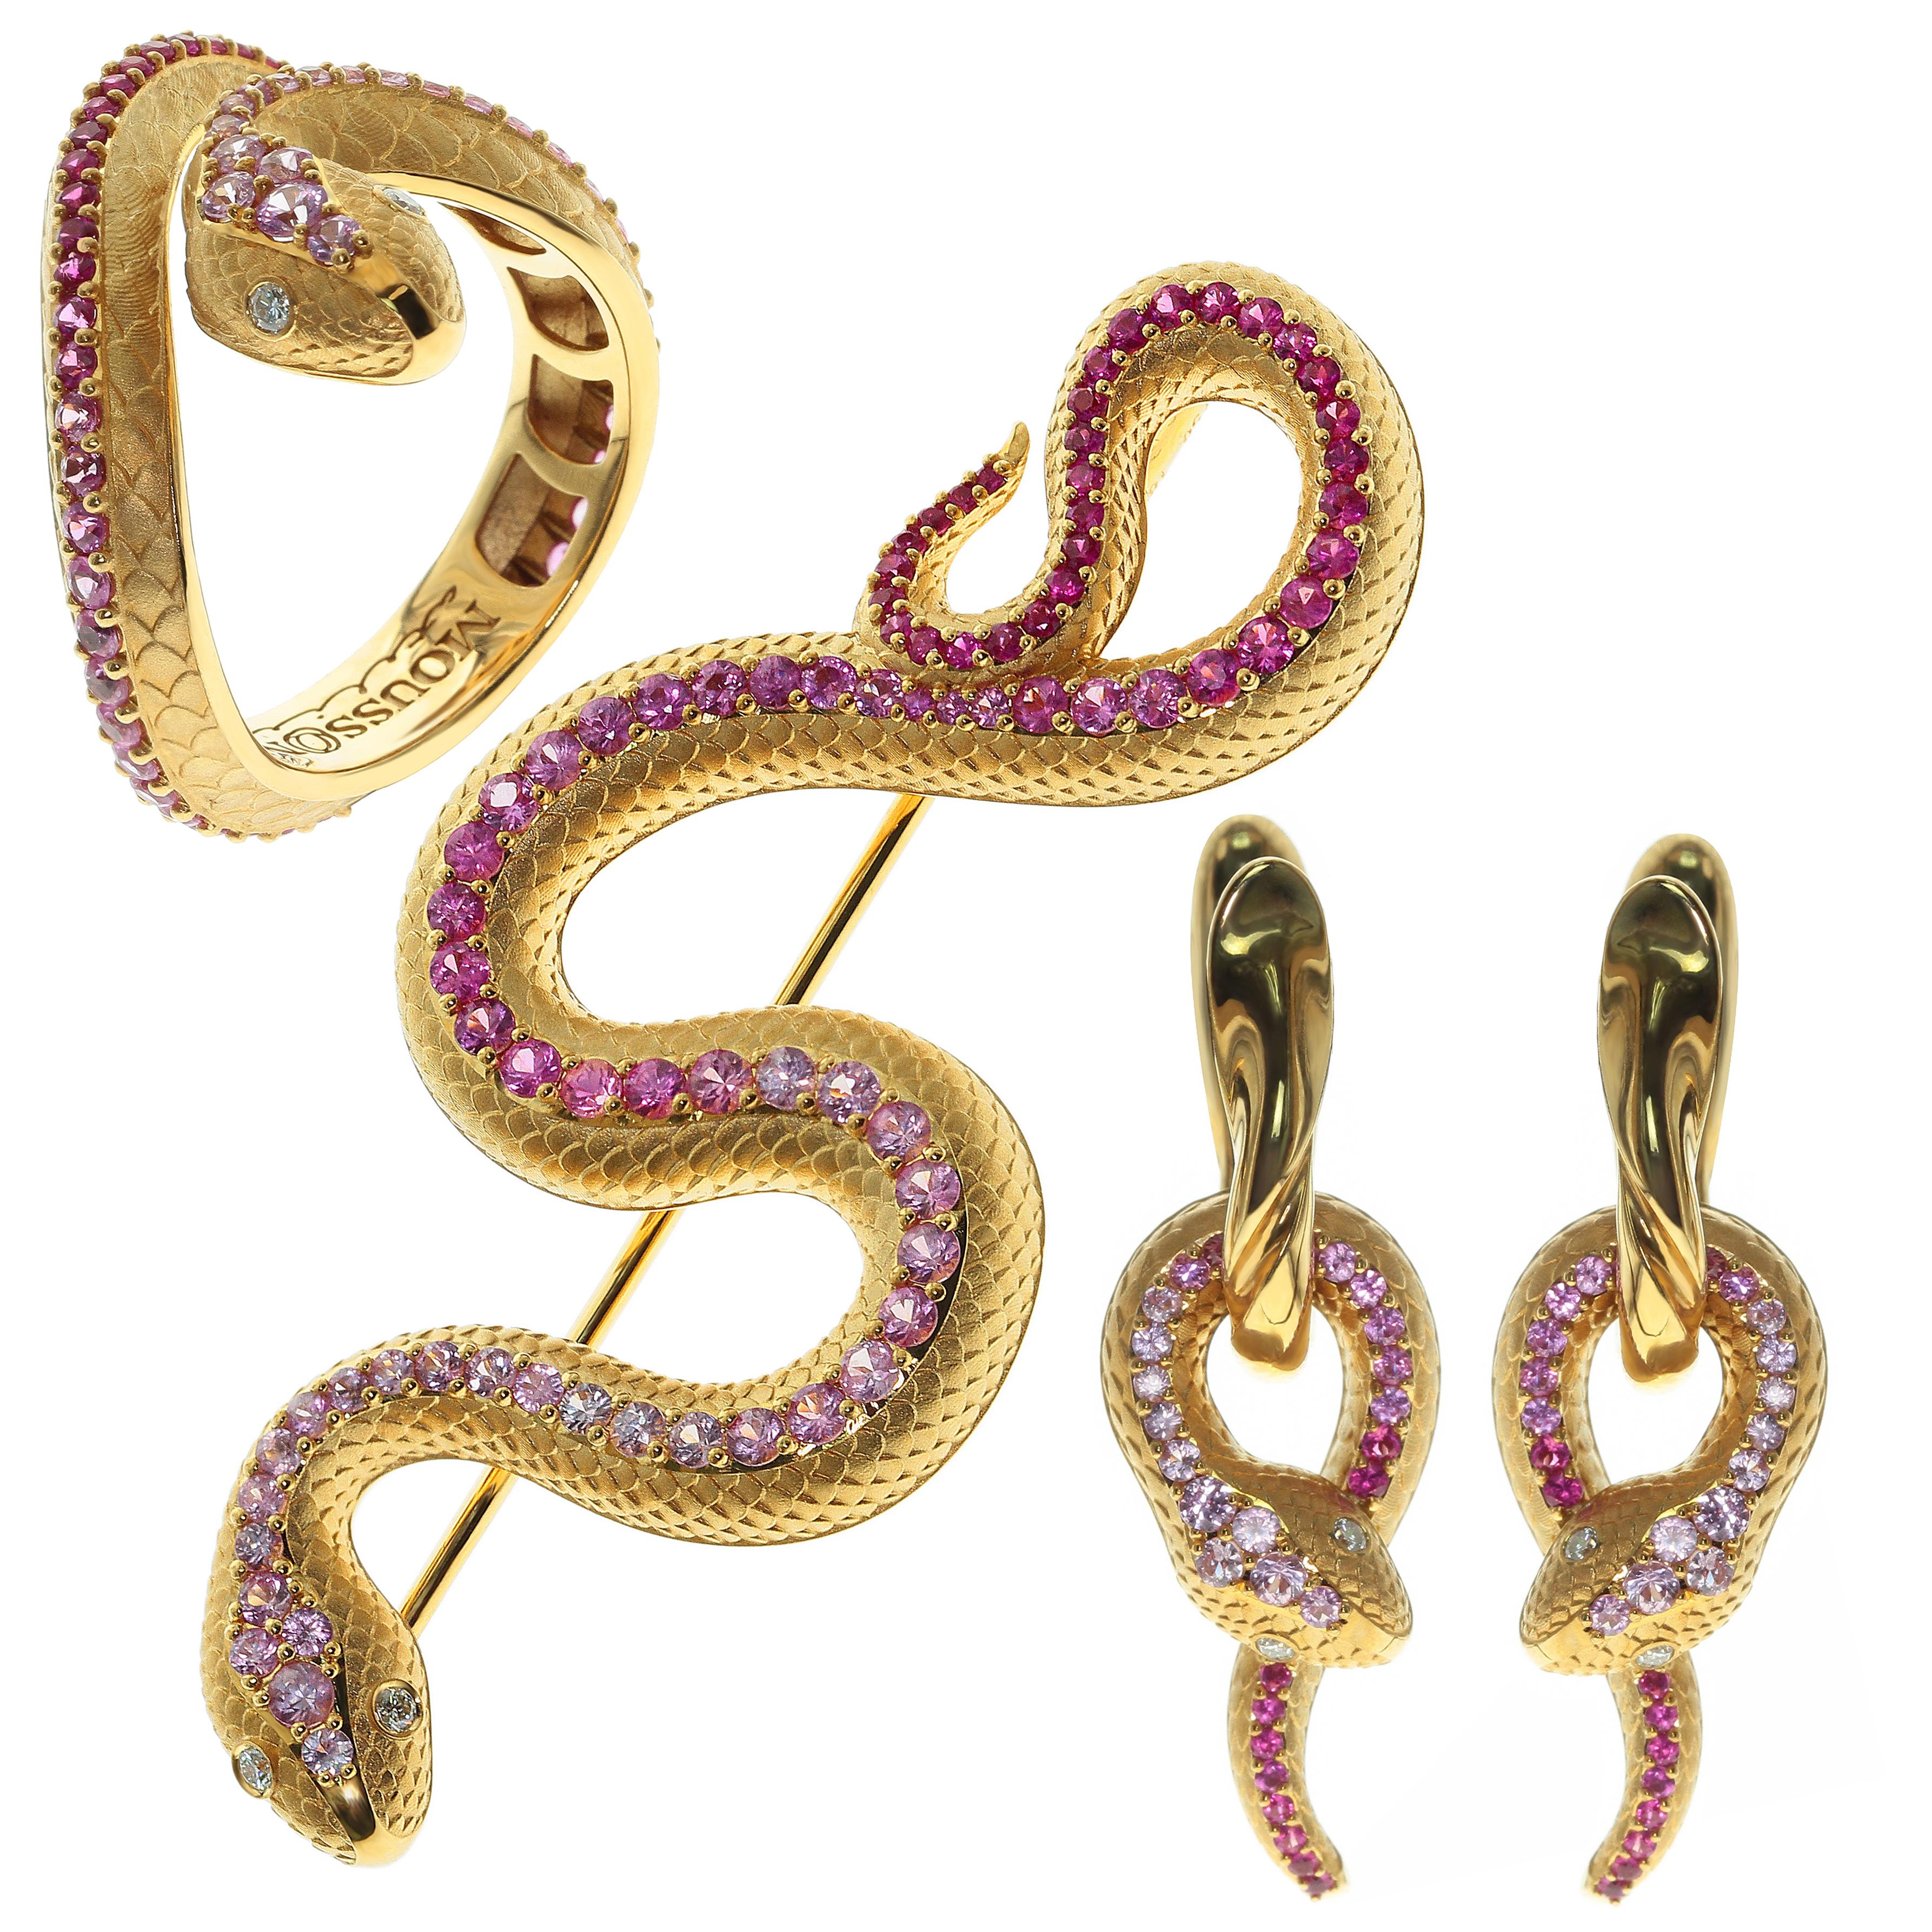 Pink Sapphire Diamonds 18 Karat Yellow Gold Snake Ring Earrings Brooch Suite For Sale